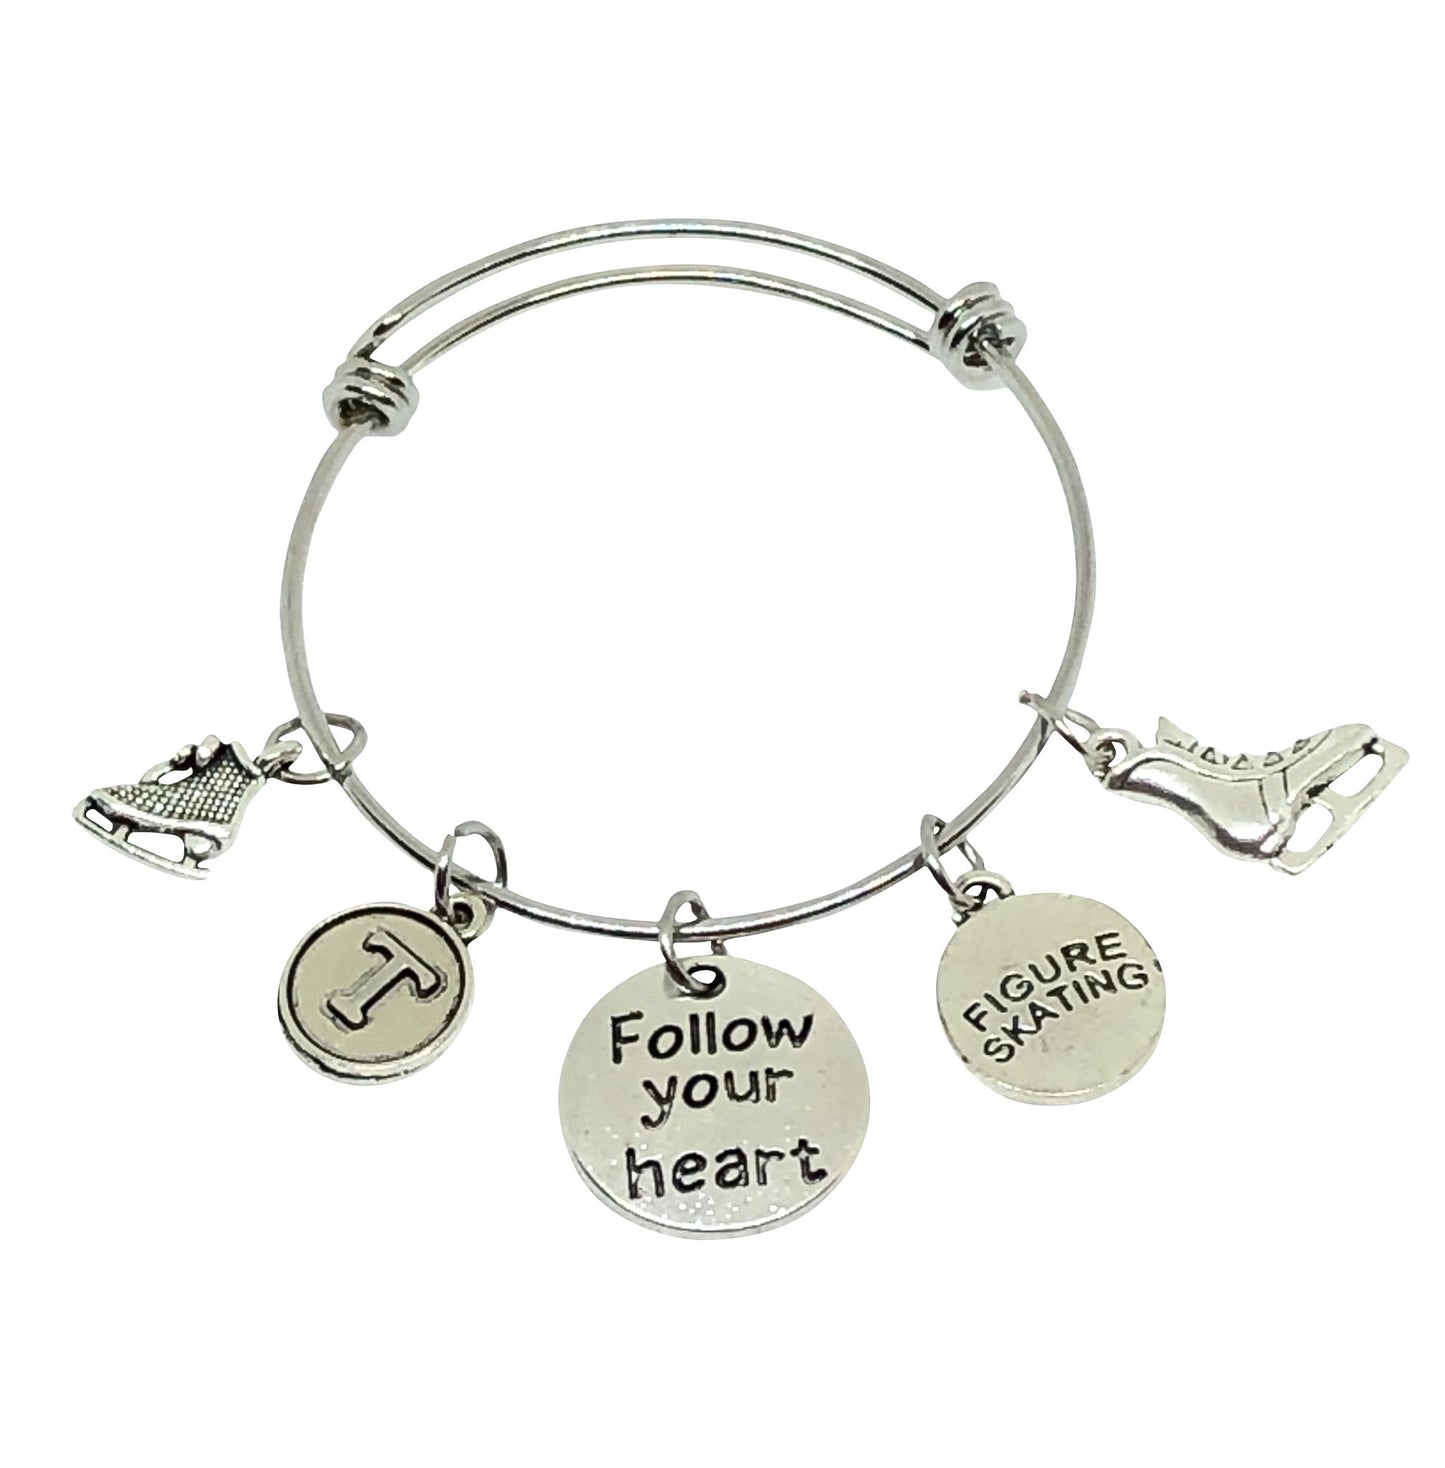 Ice Skating Bangle Personalized Charm Bracelet - Follow Your Heart - Cheer and Dance On Demand